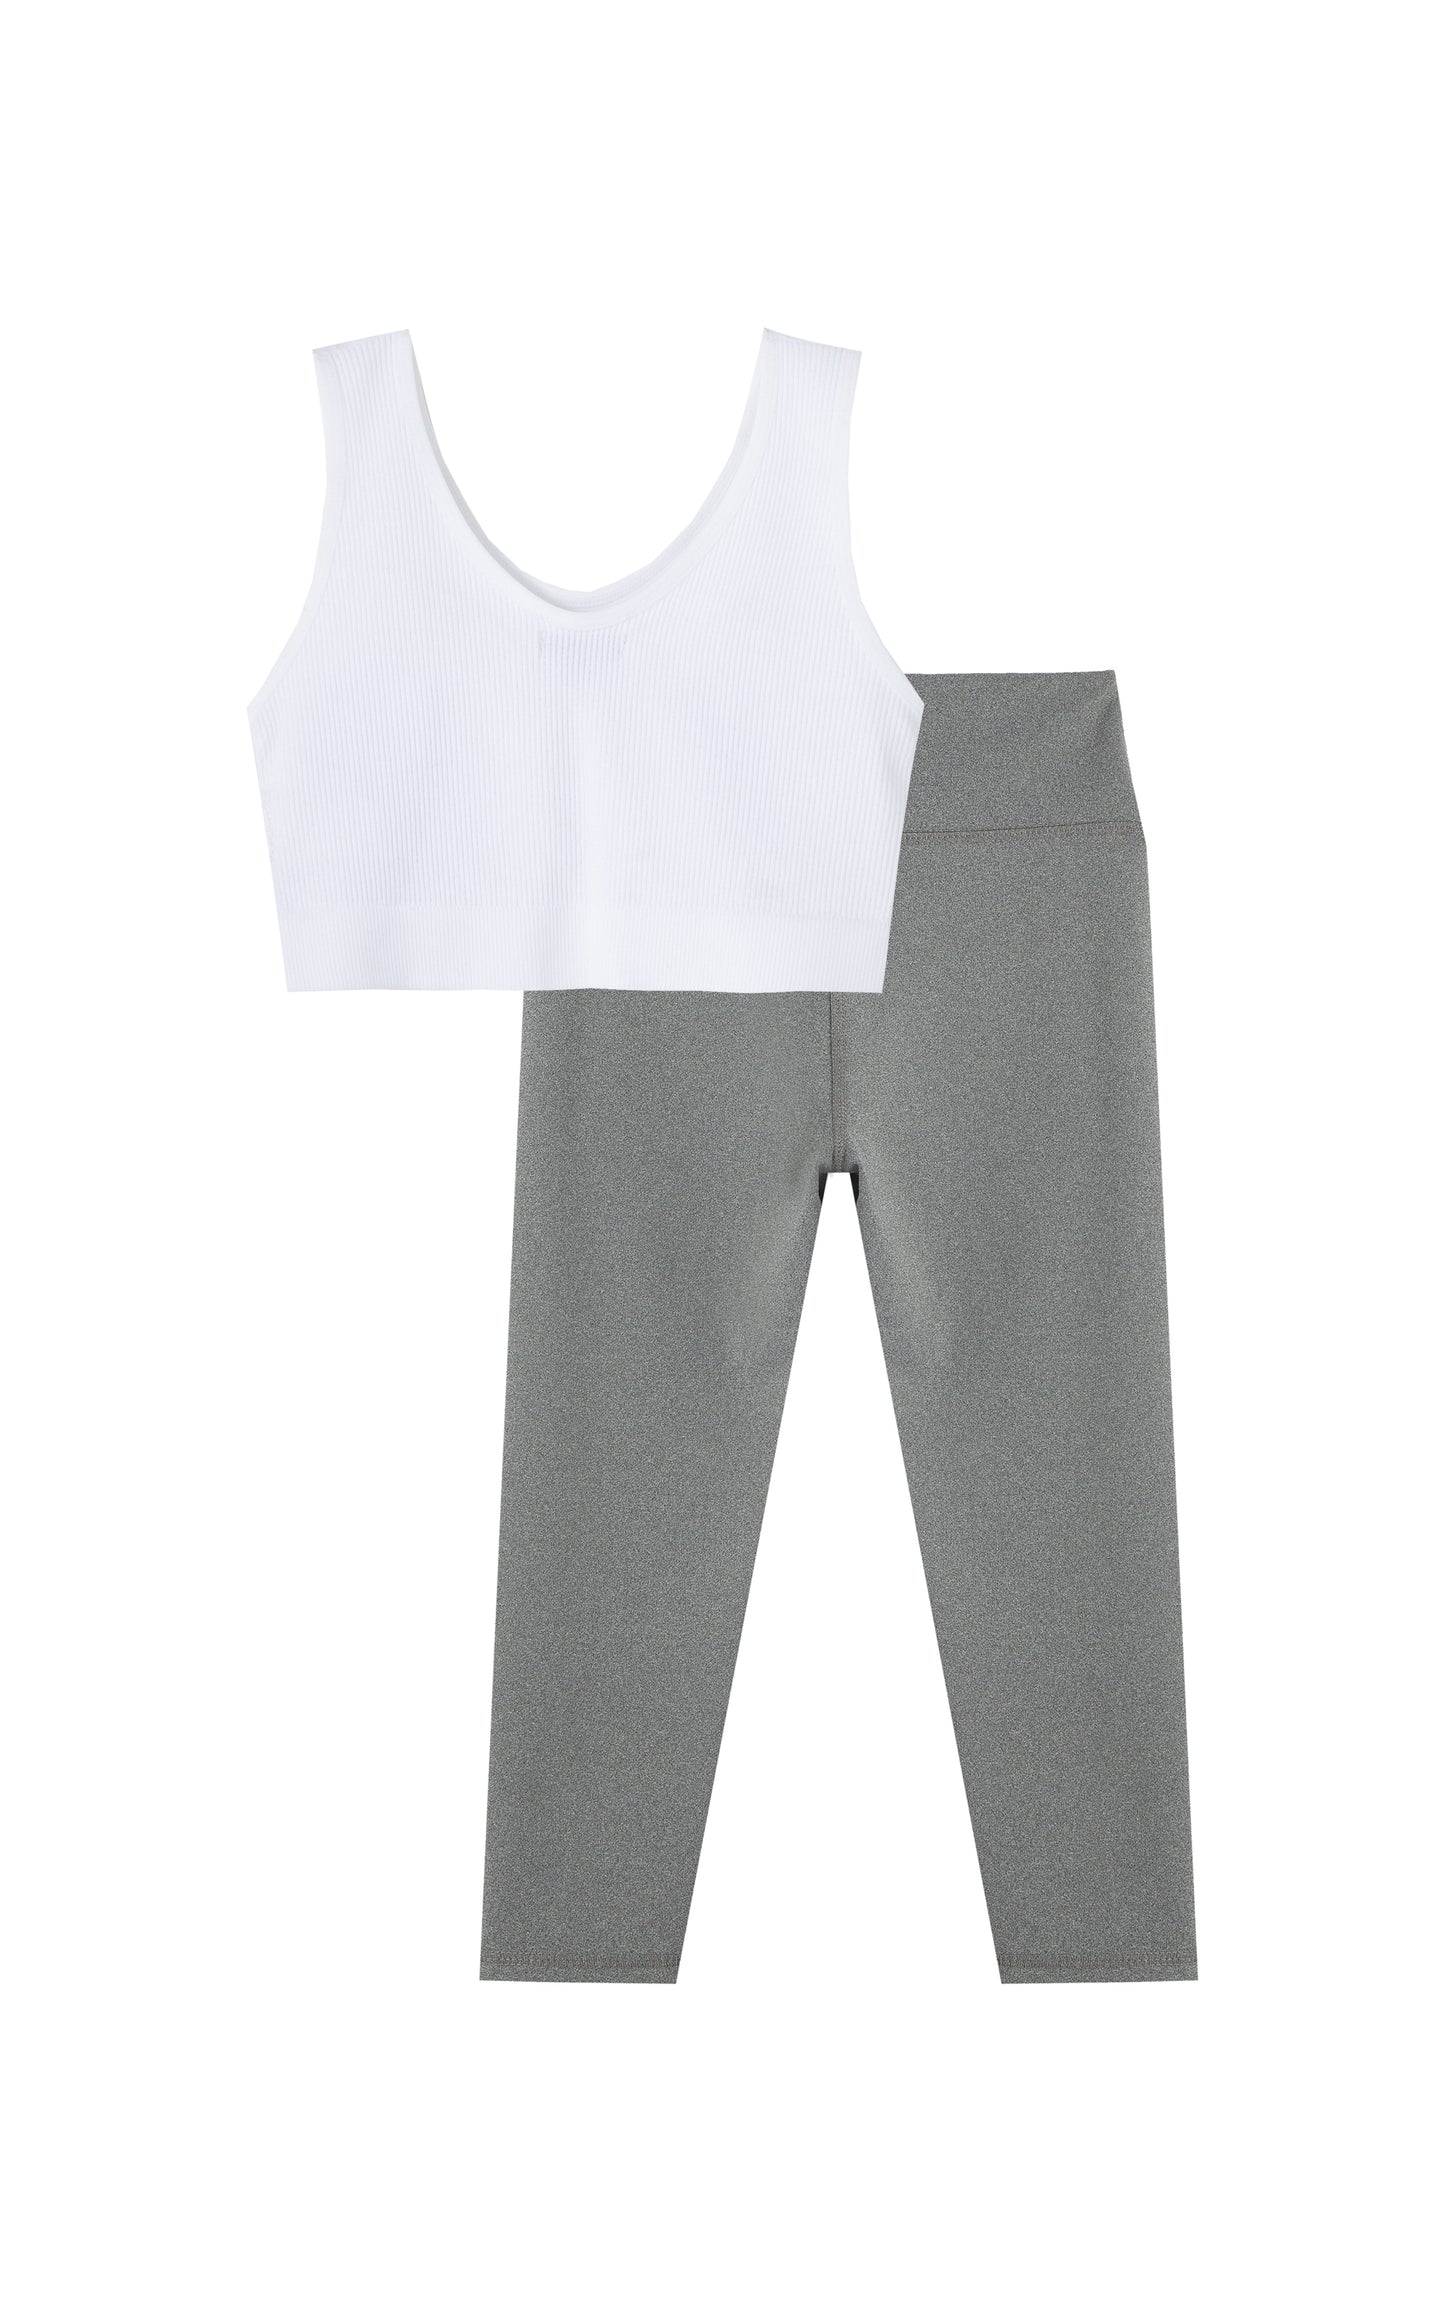 BACK OF WHITE RIBBED CROP TOP SPORTS BRA AND GREY LEGGINGS